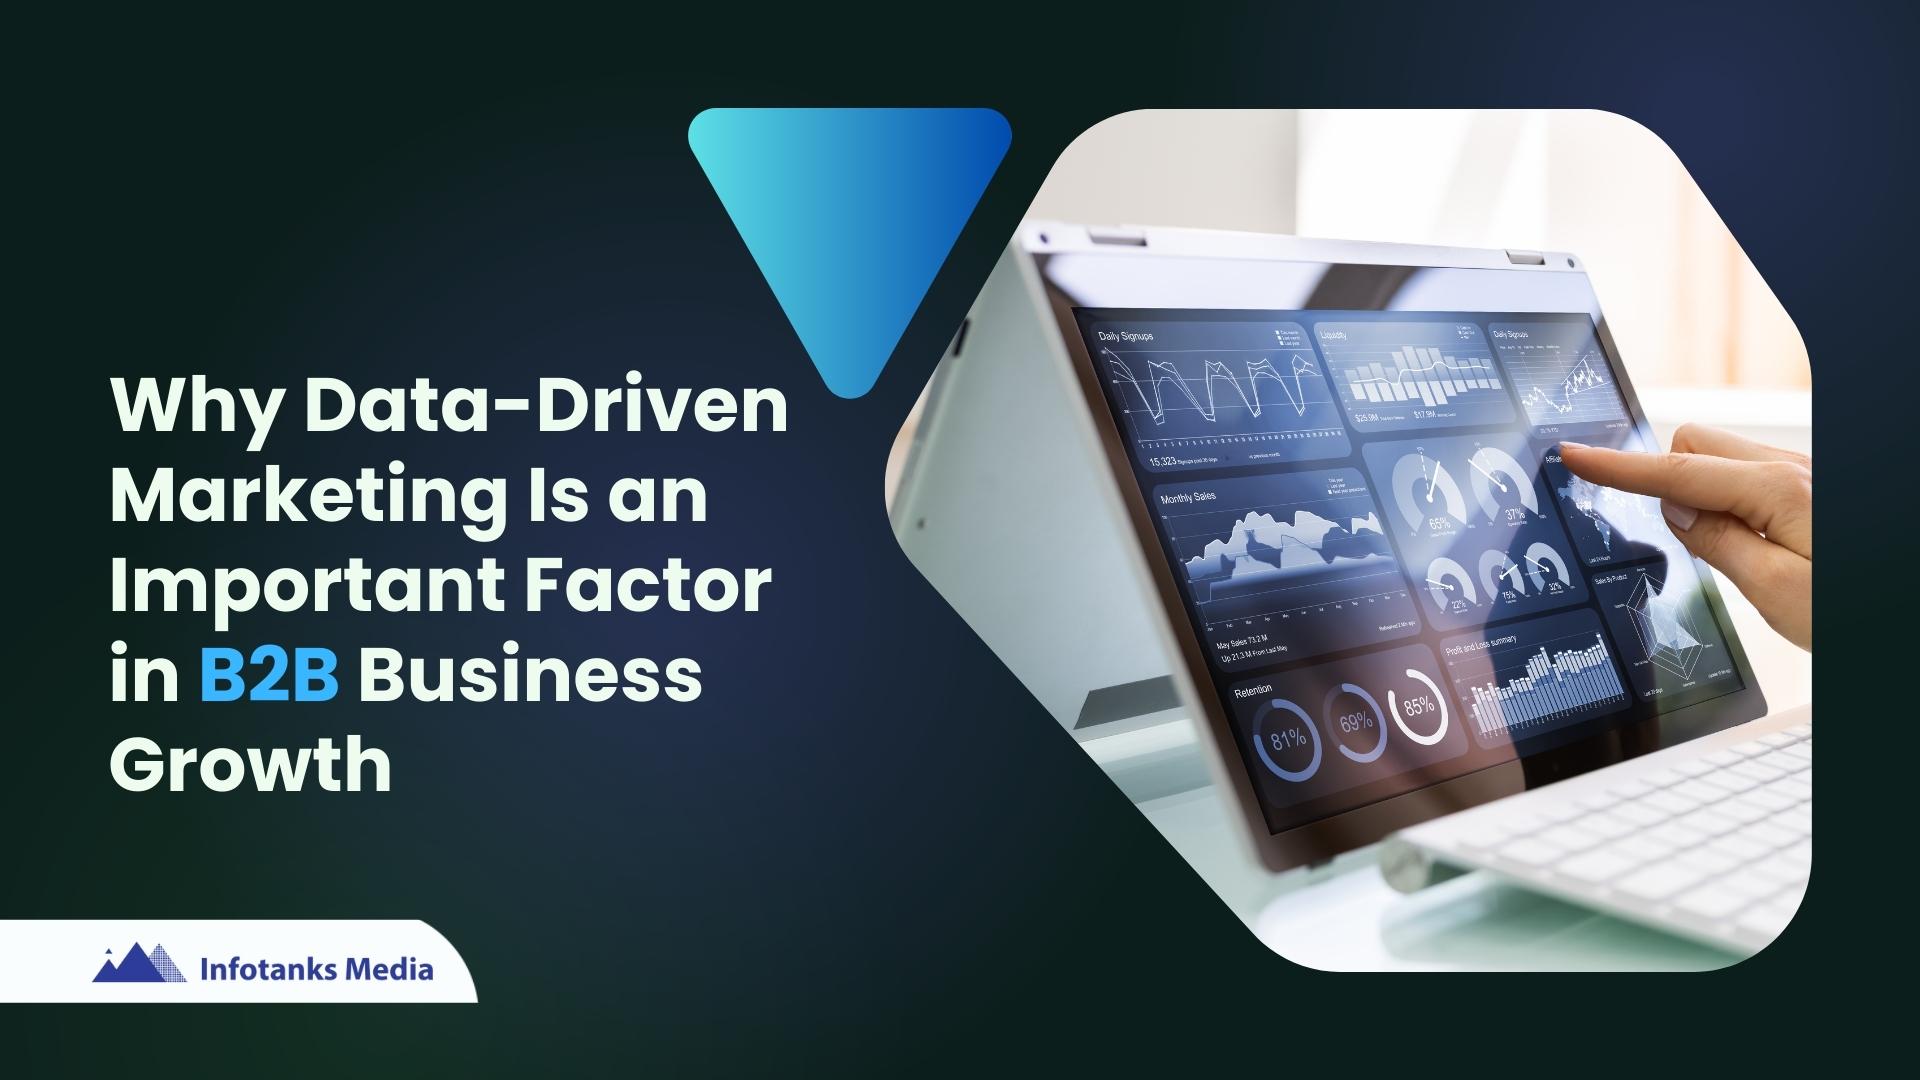 Why Data-Driven Marketing Is an Important Factor in B2B Business Growth